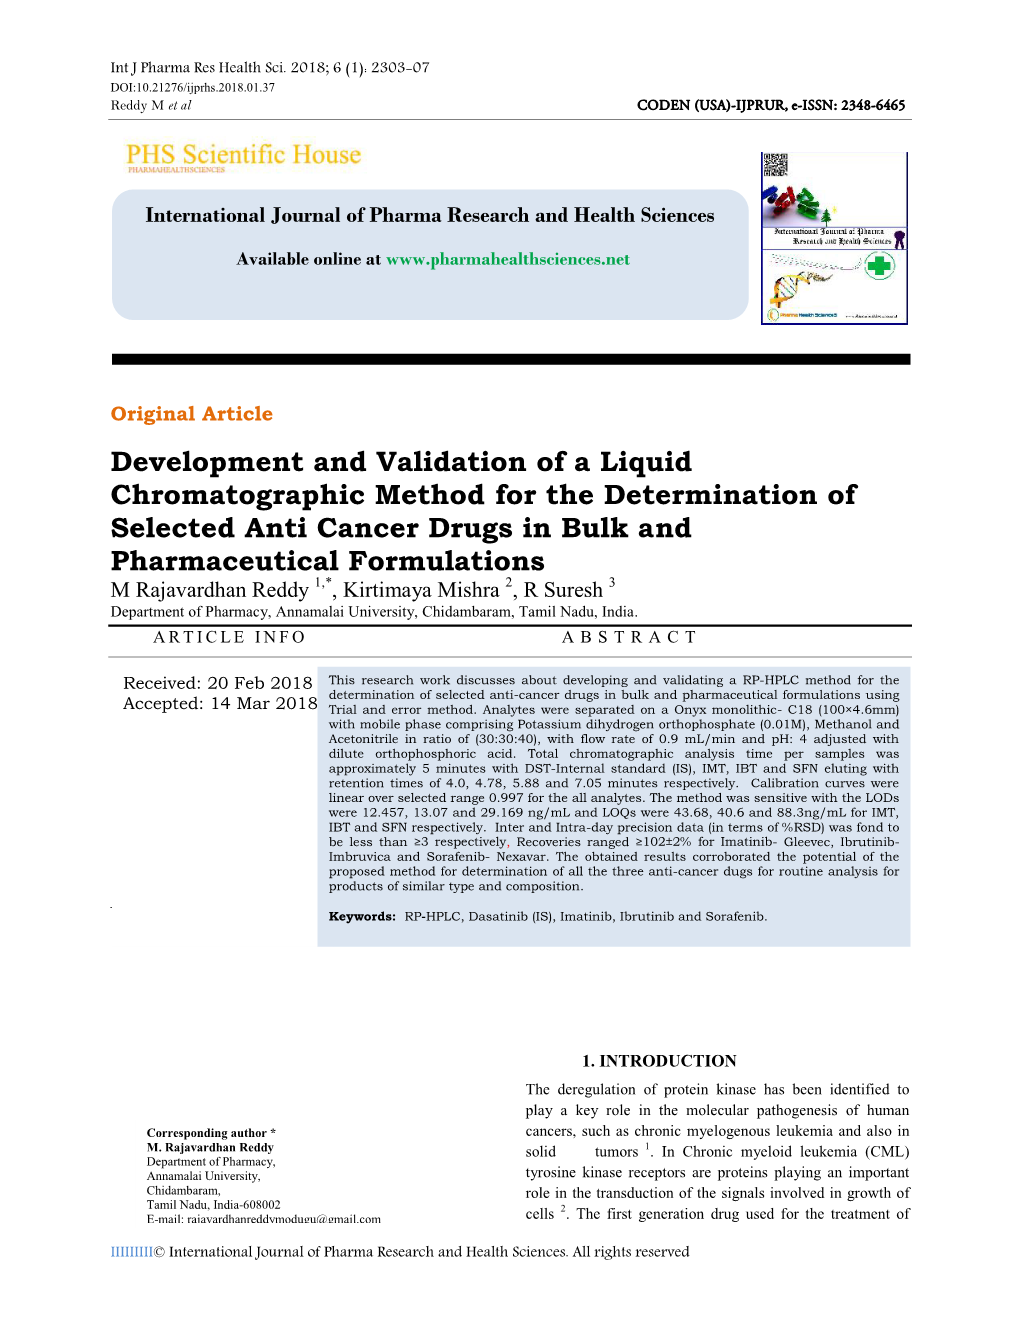 Development and Validation of a Liquid Chromatographic Method For